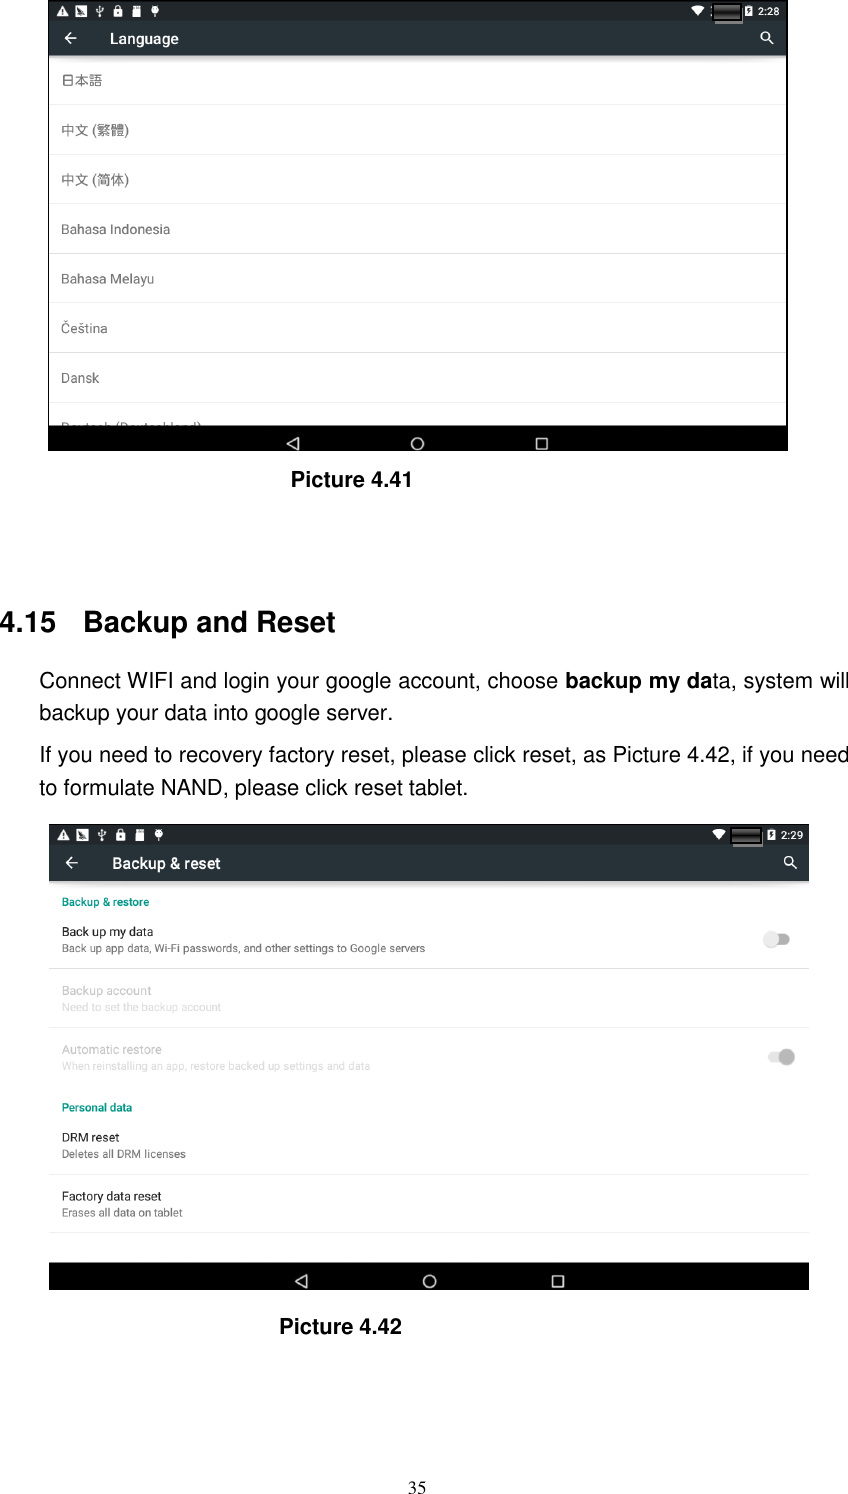      35                              Picture 4.41                                   4.15   Backup and Reset Connect WIFI and login your google account, choose backup my data, system will backup your data into google server.   If you need to recovery factory reset, please click reset, as Picture 4.42, if you need to formulate NAND, please click reset tablet.                                Picture 4.42 